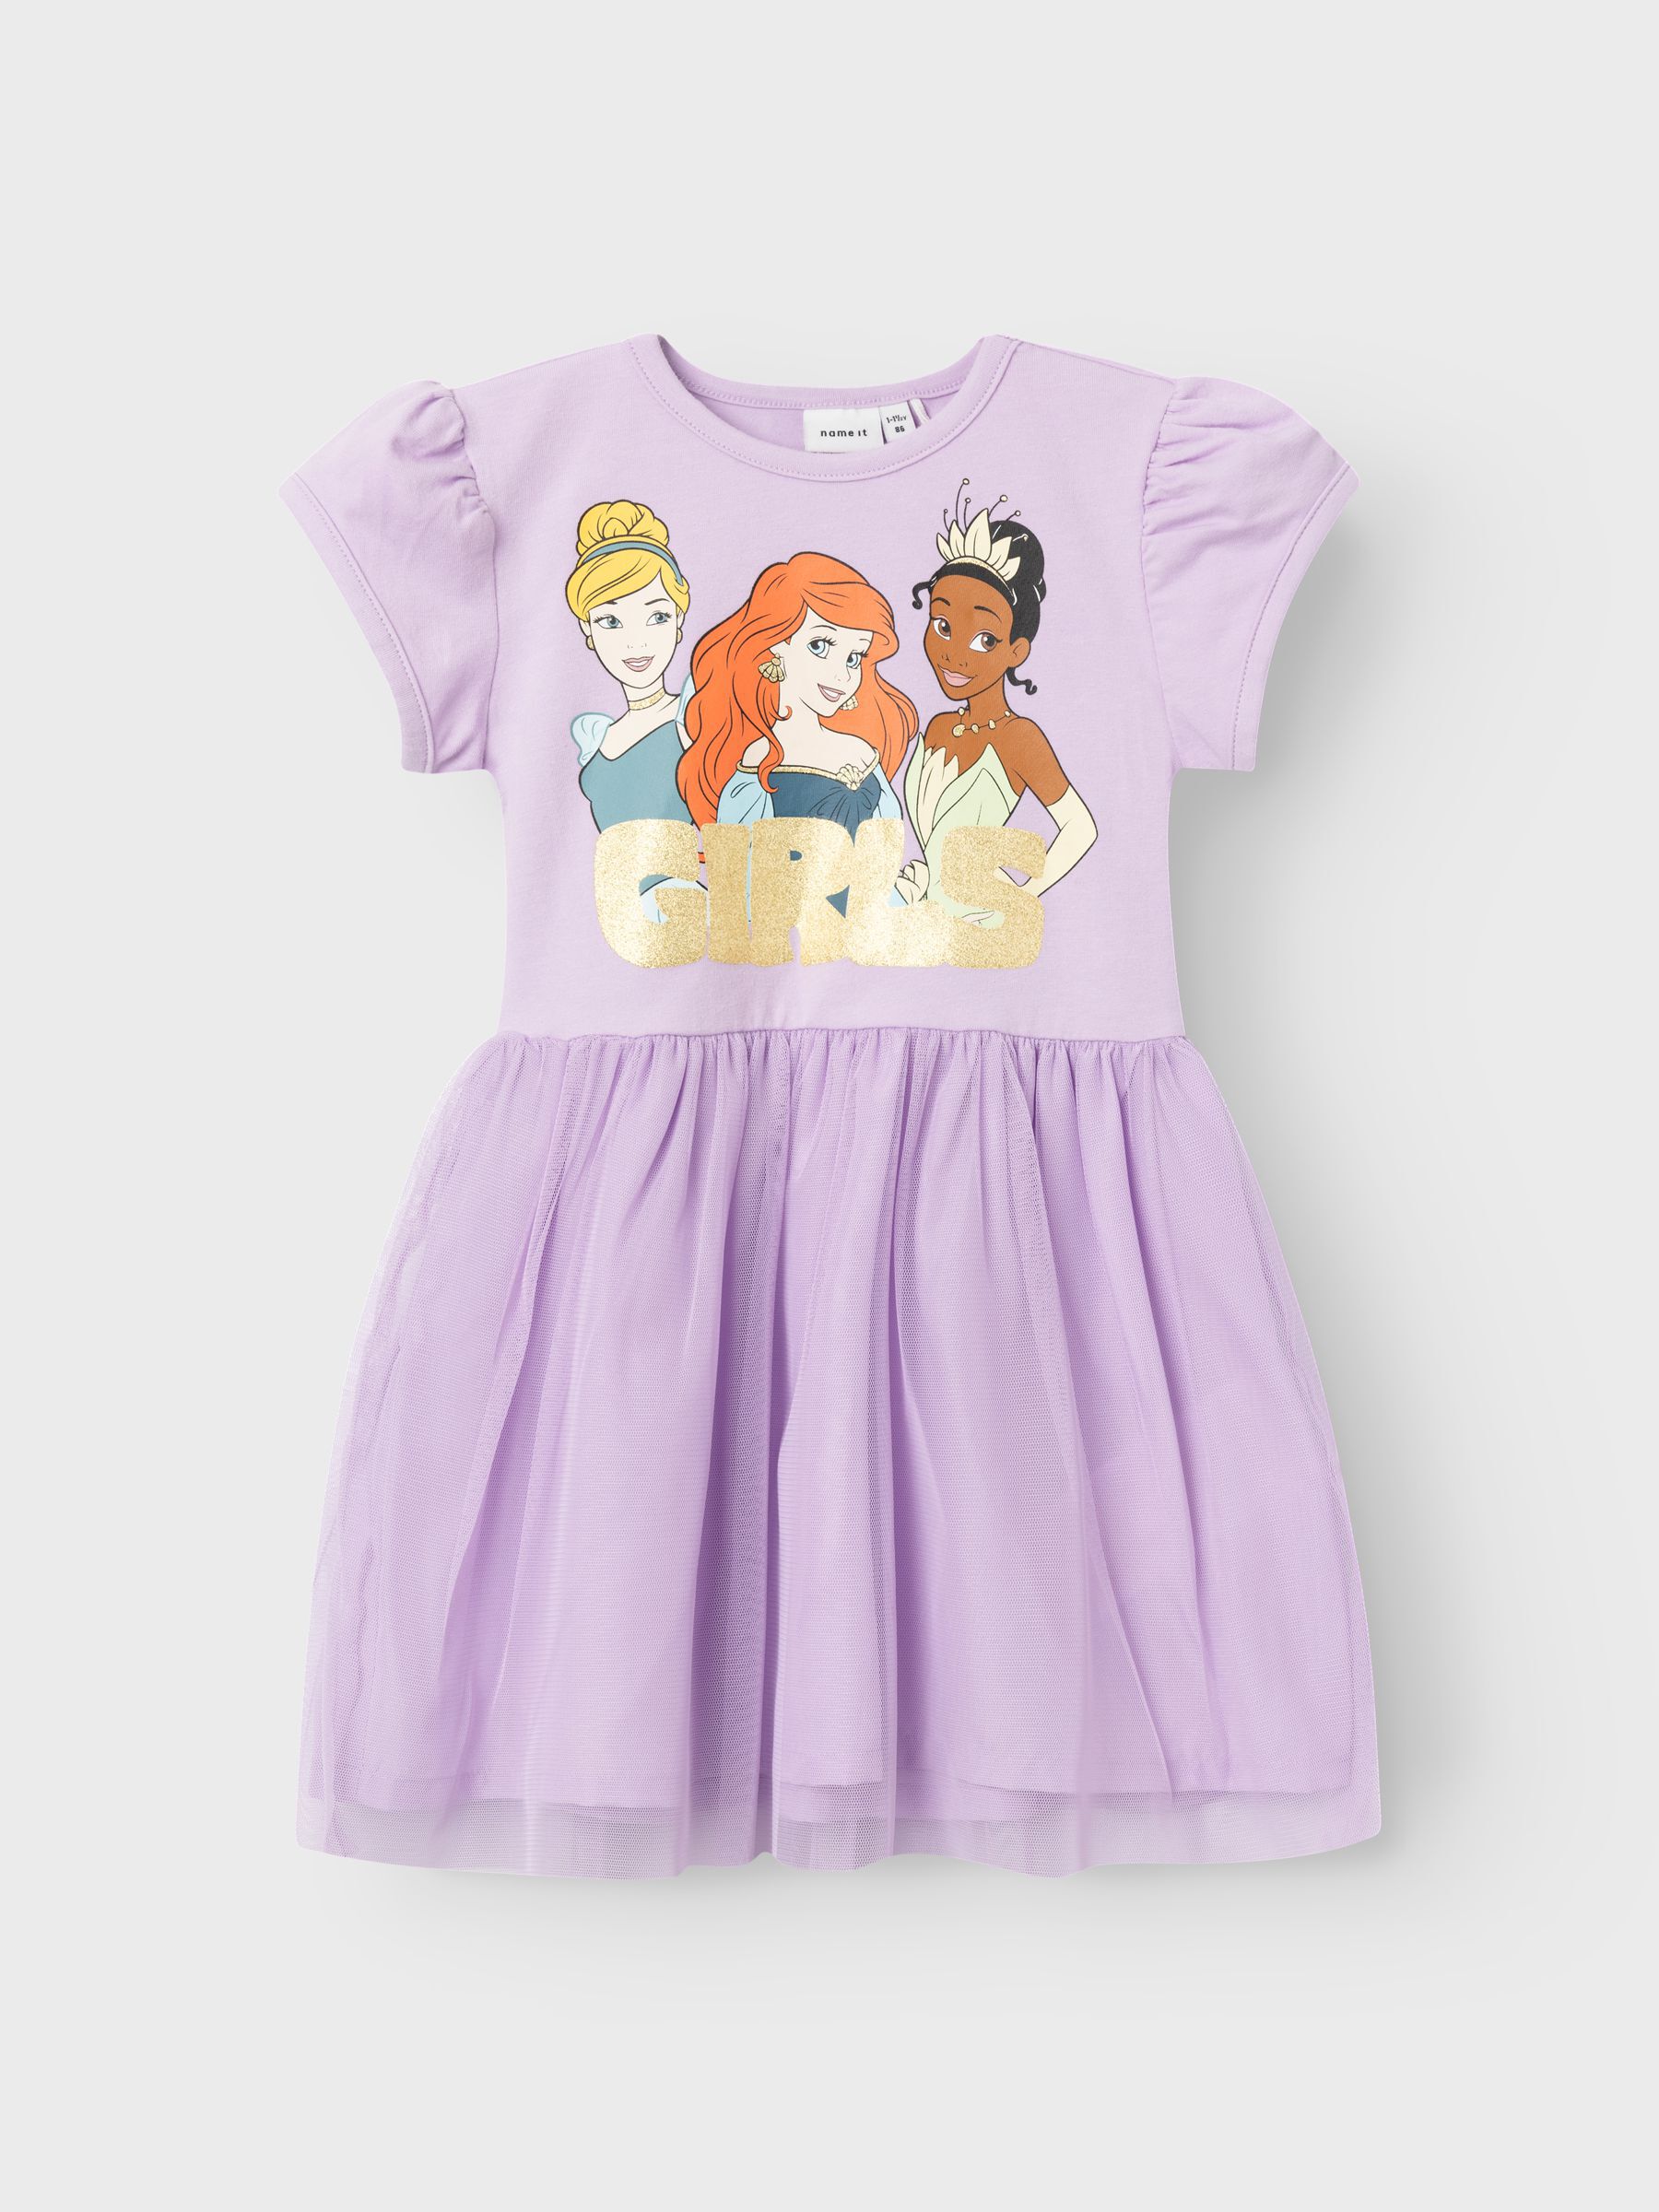 Official Disney Princesses Character Clothing | imagikids